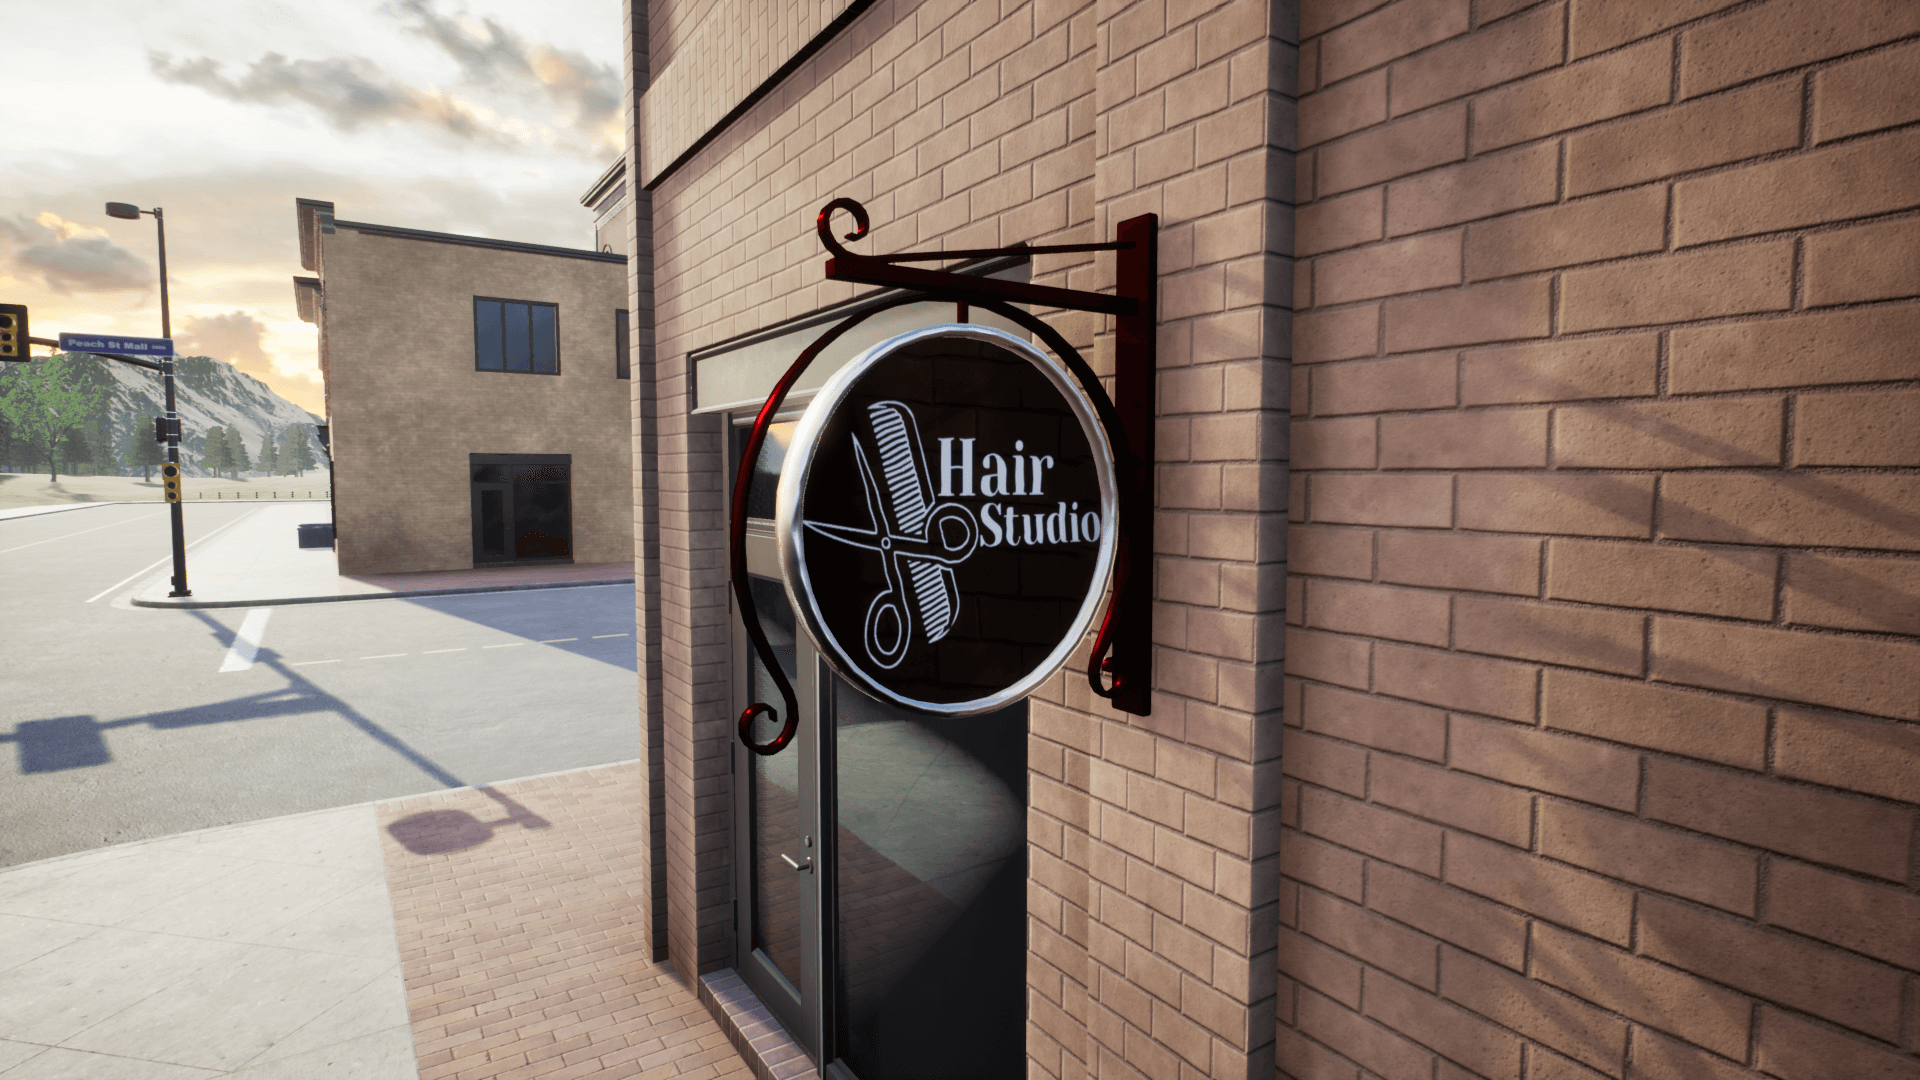 An image showing Shop Signboards asset pack, created with Unreal Engine.